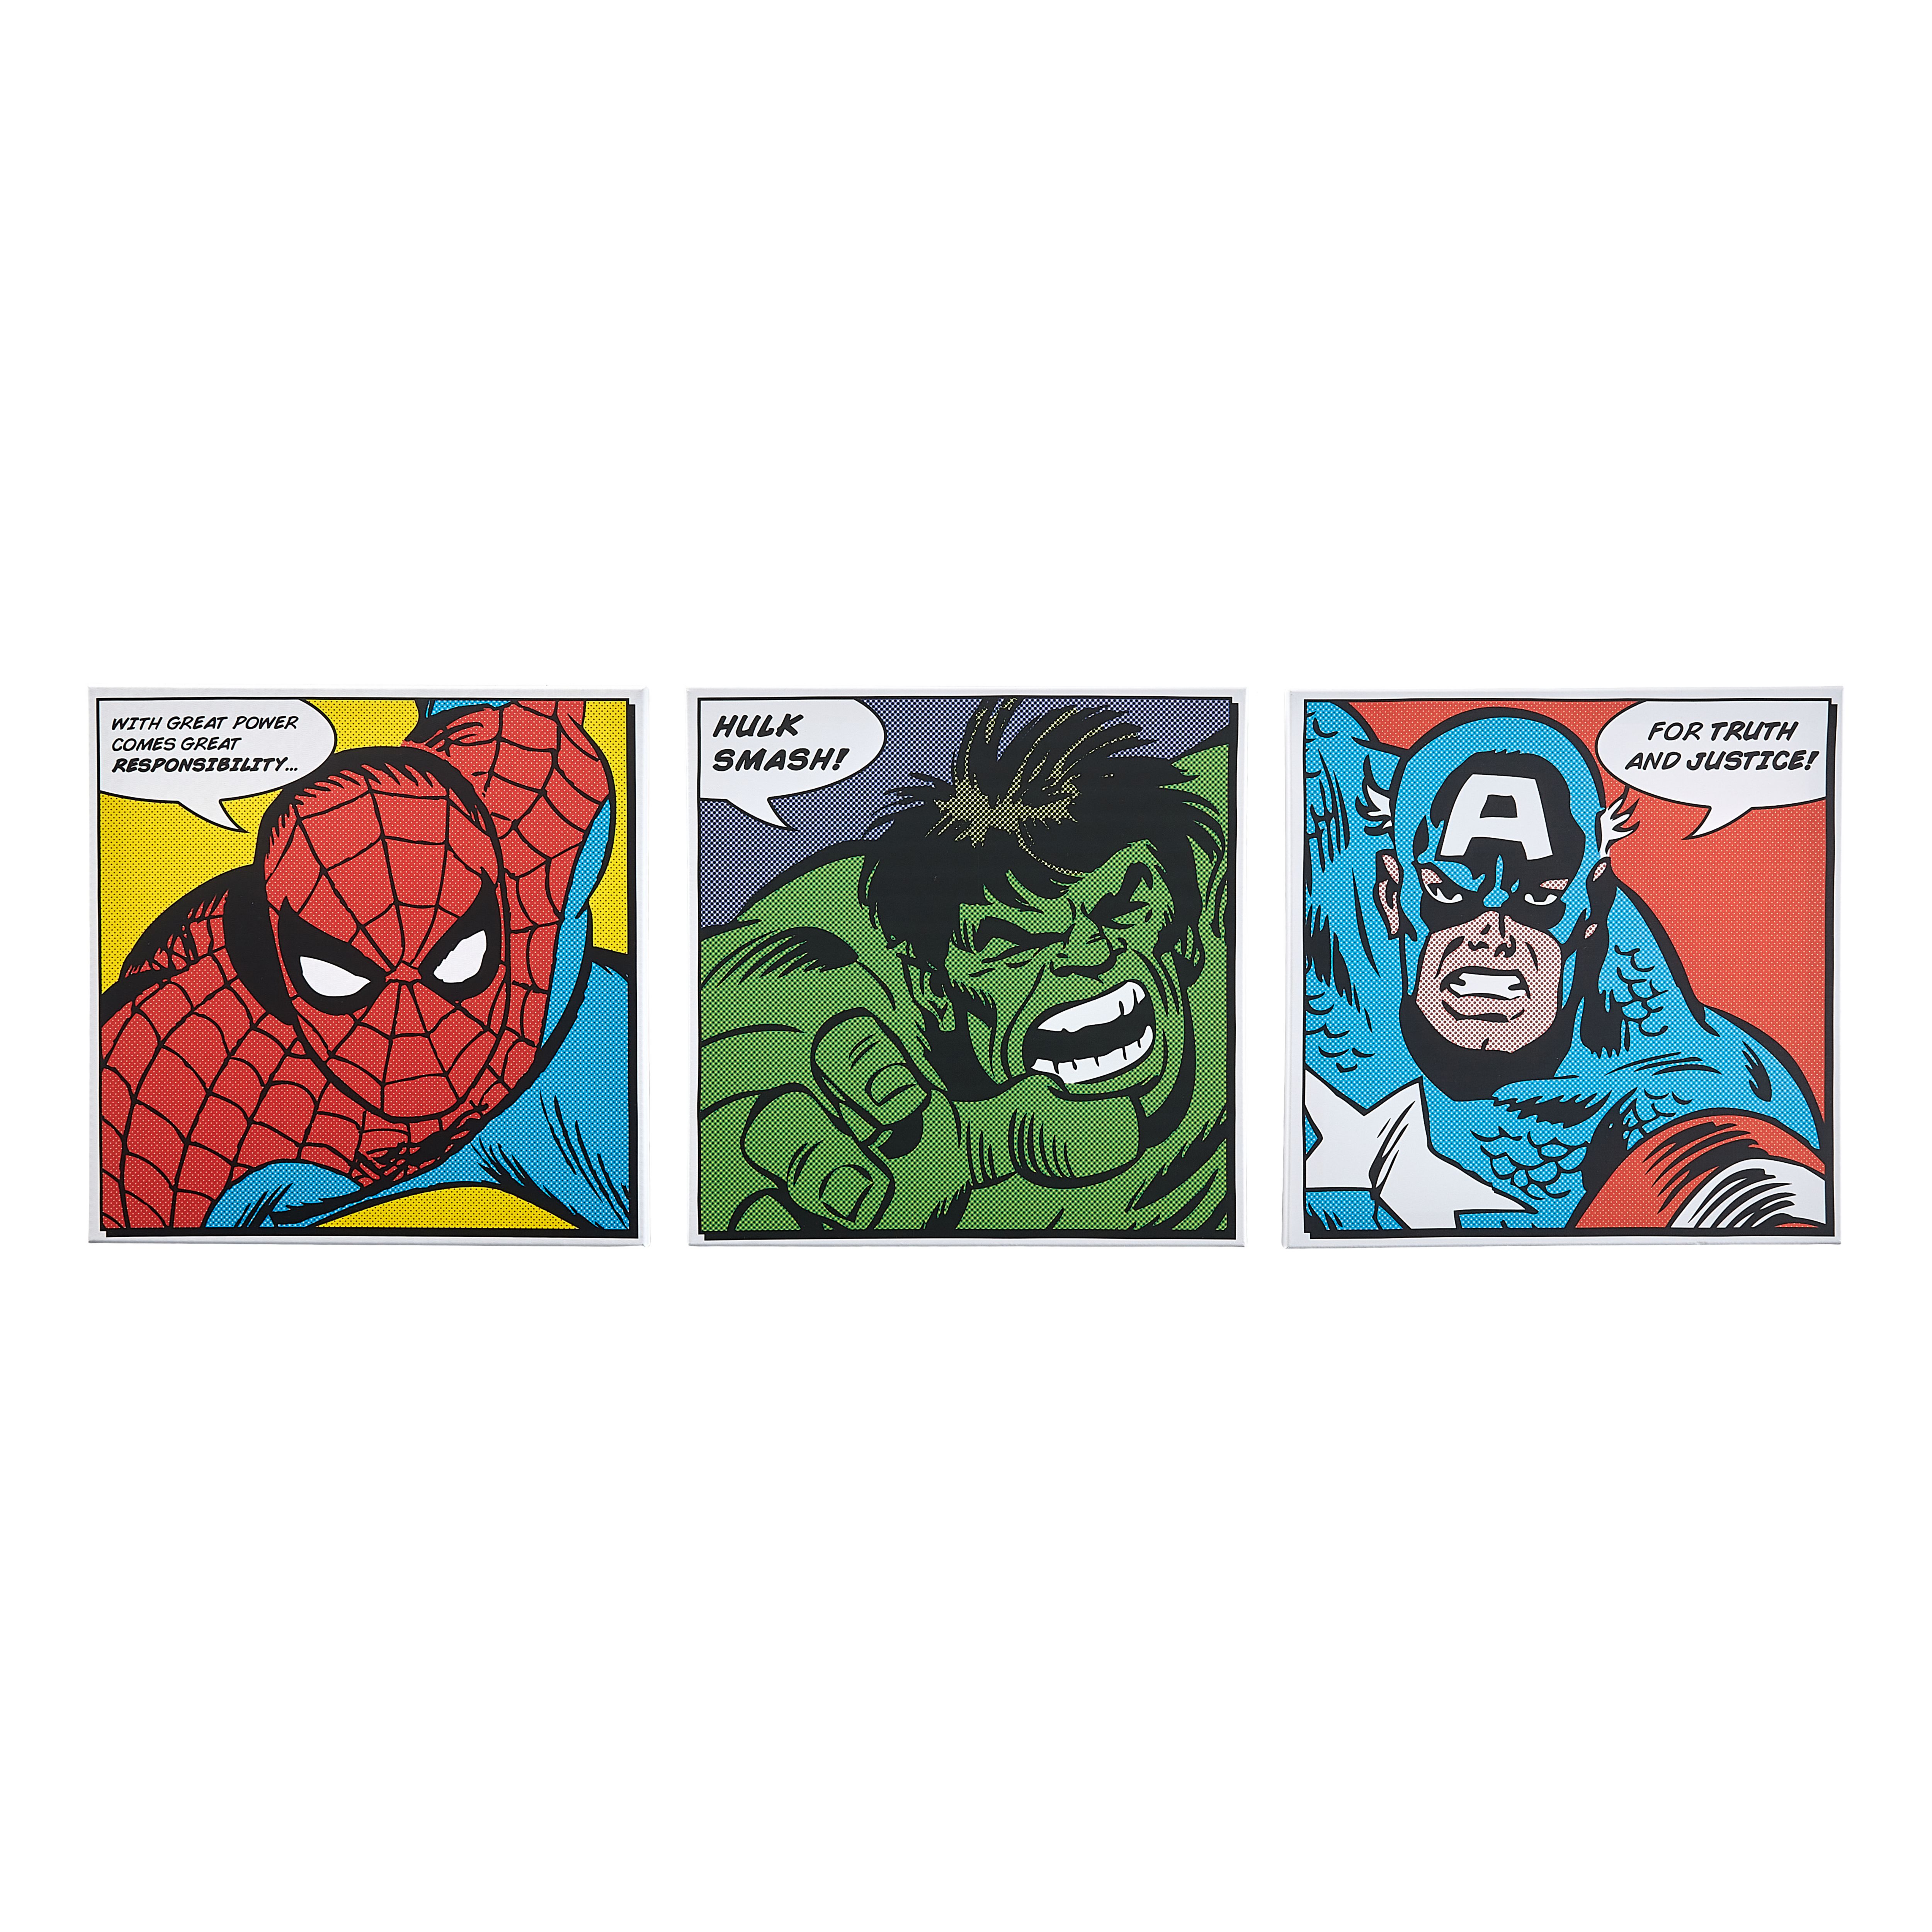 Marvel Comics Spider-Man Hinged Handle Plastic Water Bottle and Sticker Set